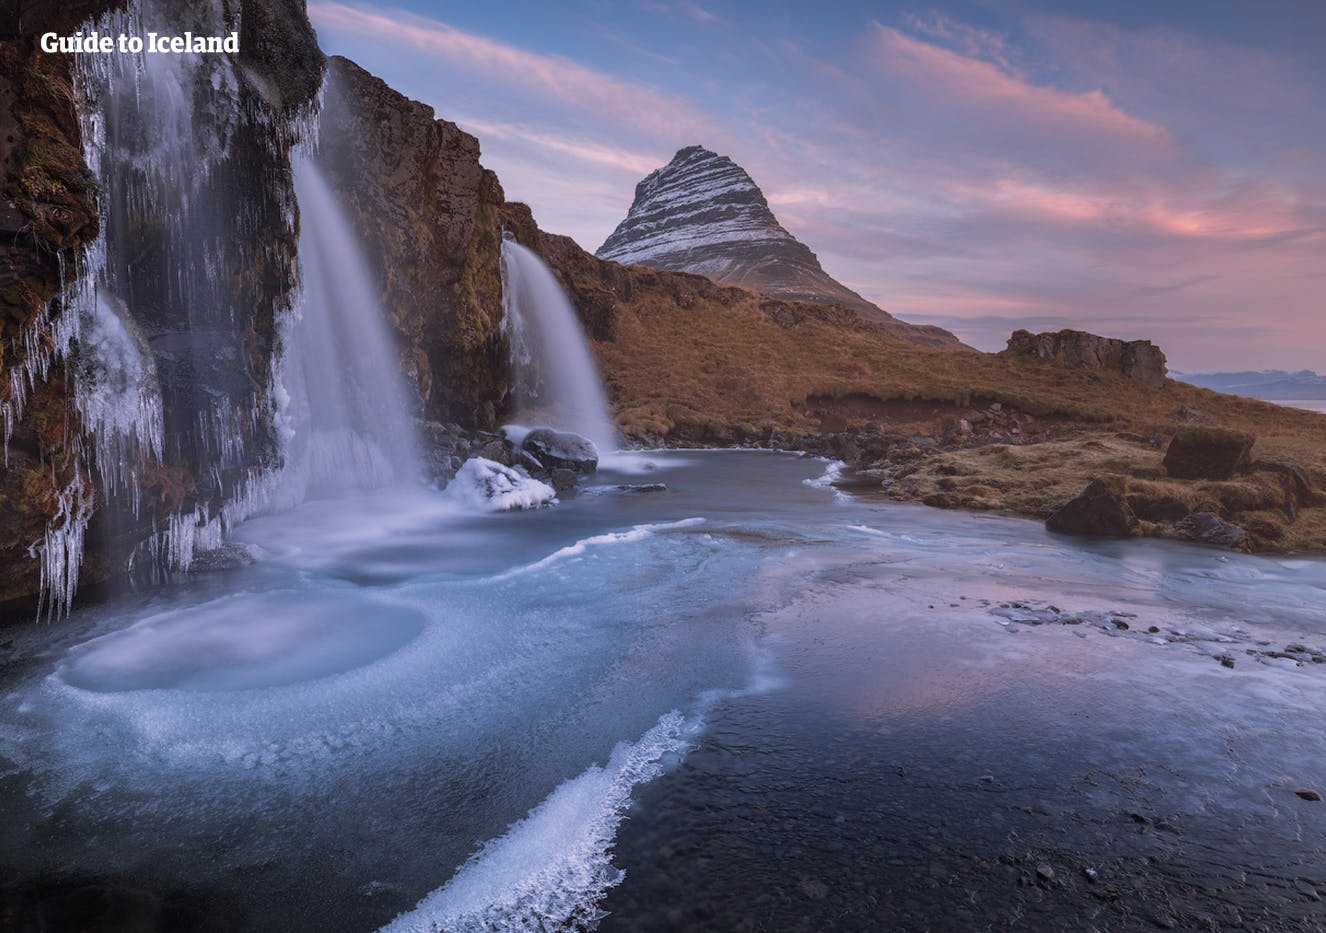 The iconic Kirkjufell mountain on the Snæfellsnes Peninsula was described as 'the mountain like an arrowhead' by the Hound in Game of Thrones.